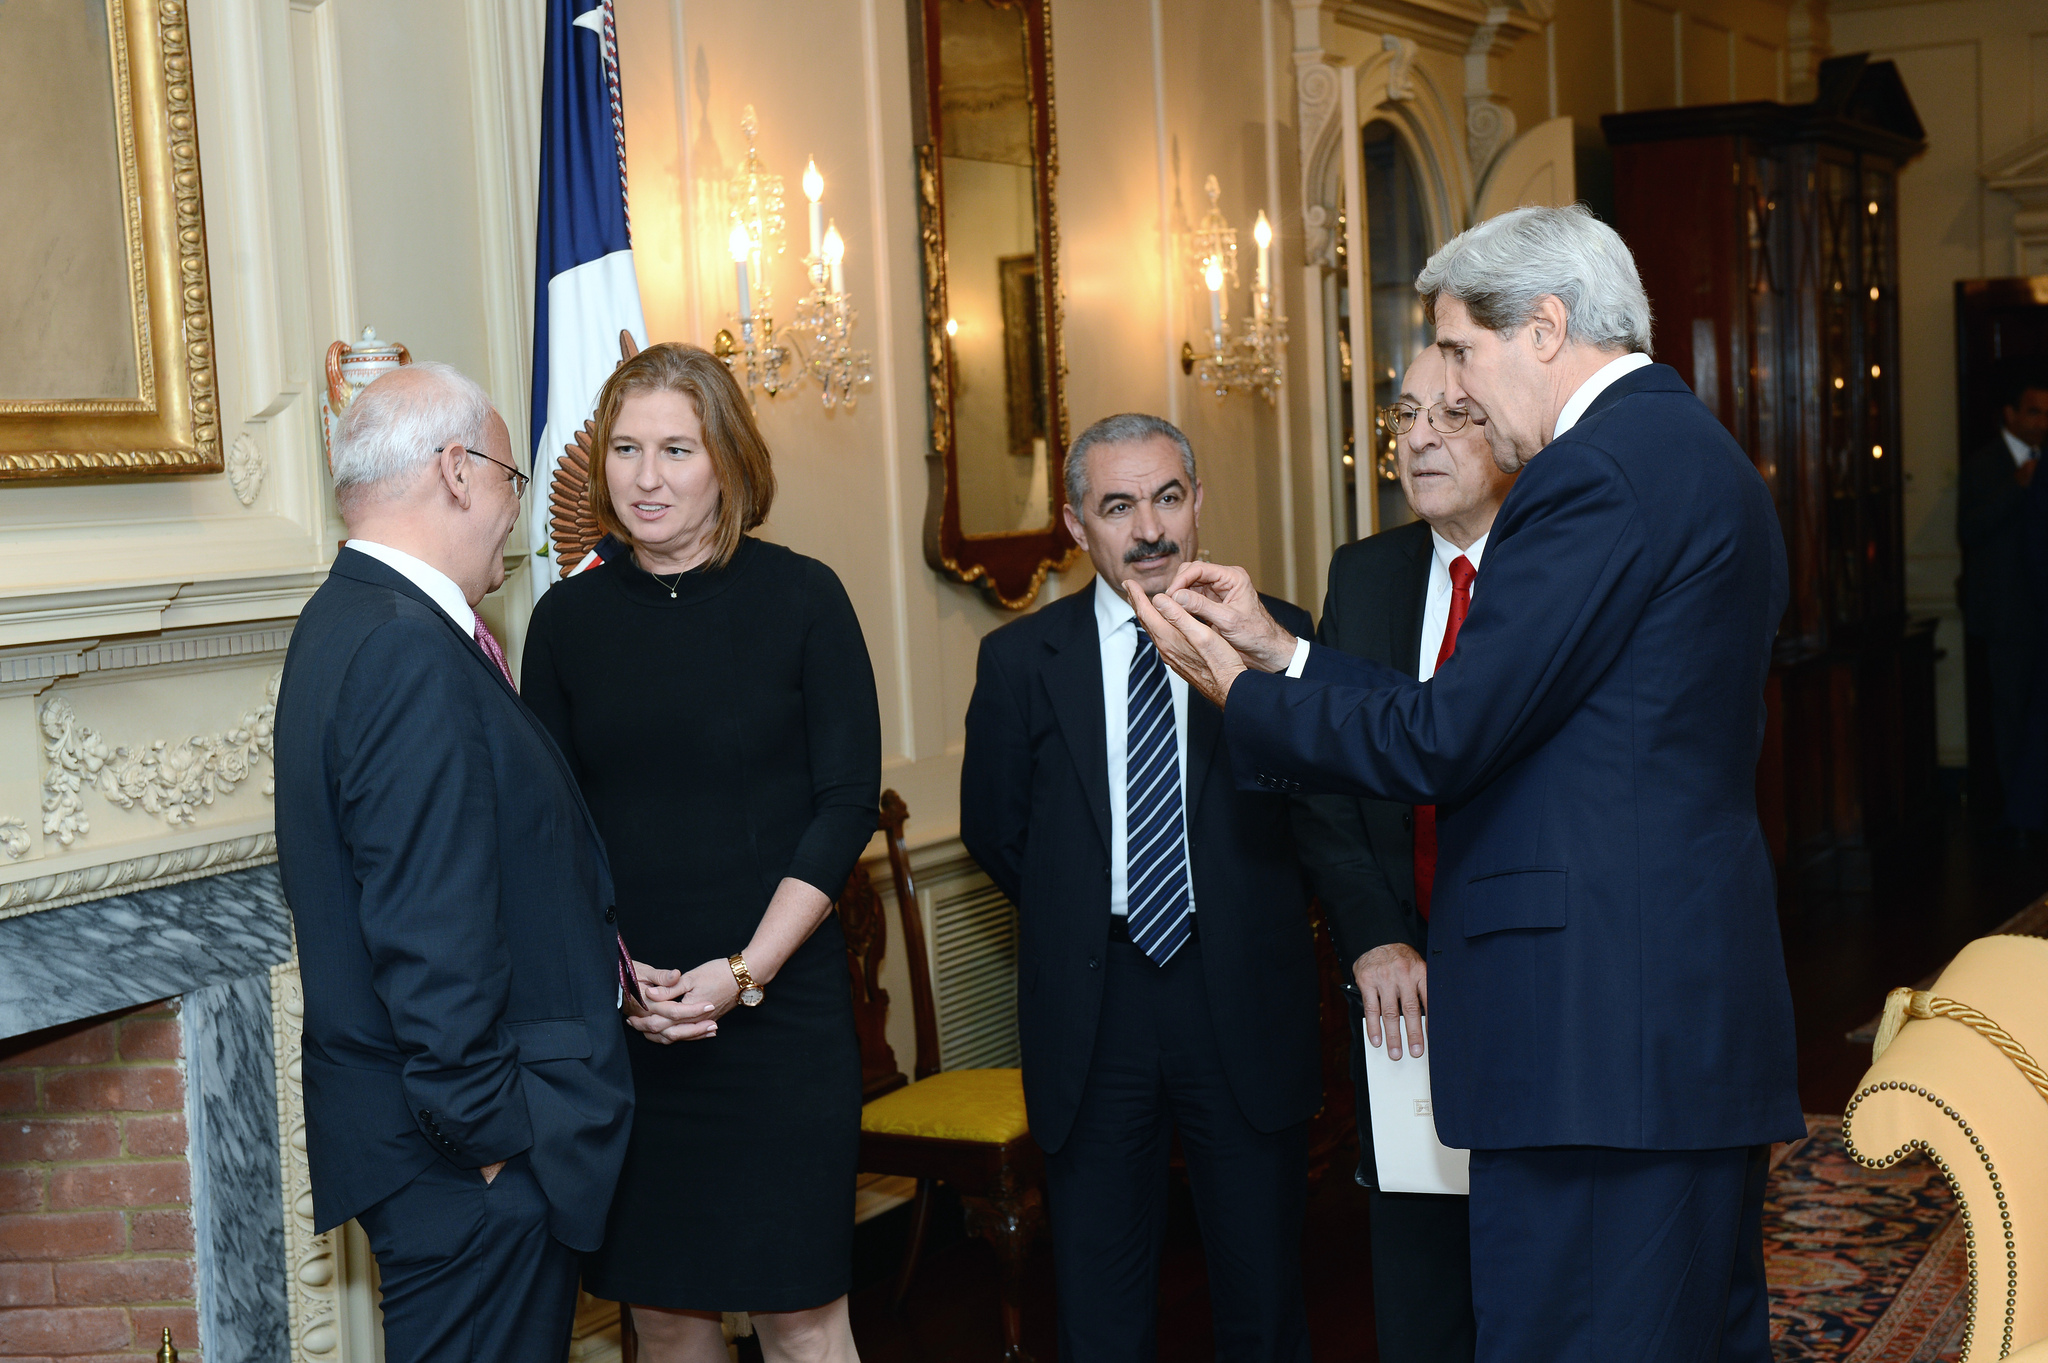 Secretary Kerry Hosts an Iftar for the Israeli Justice Minsiter Livni and Palestinian Chief Negotiator Erekat // Credit: State Department via Flickr